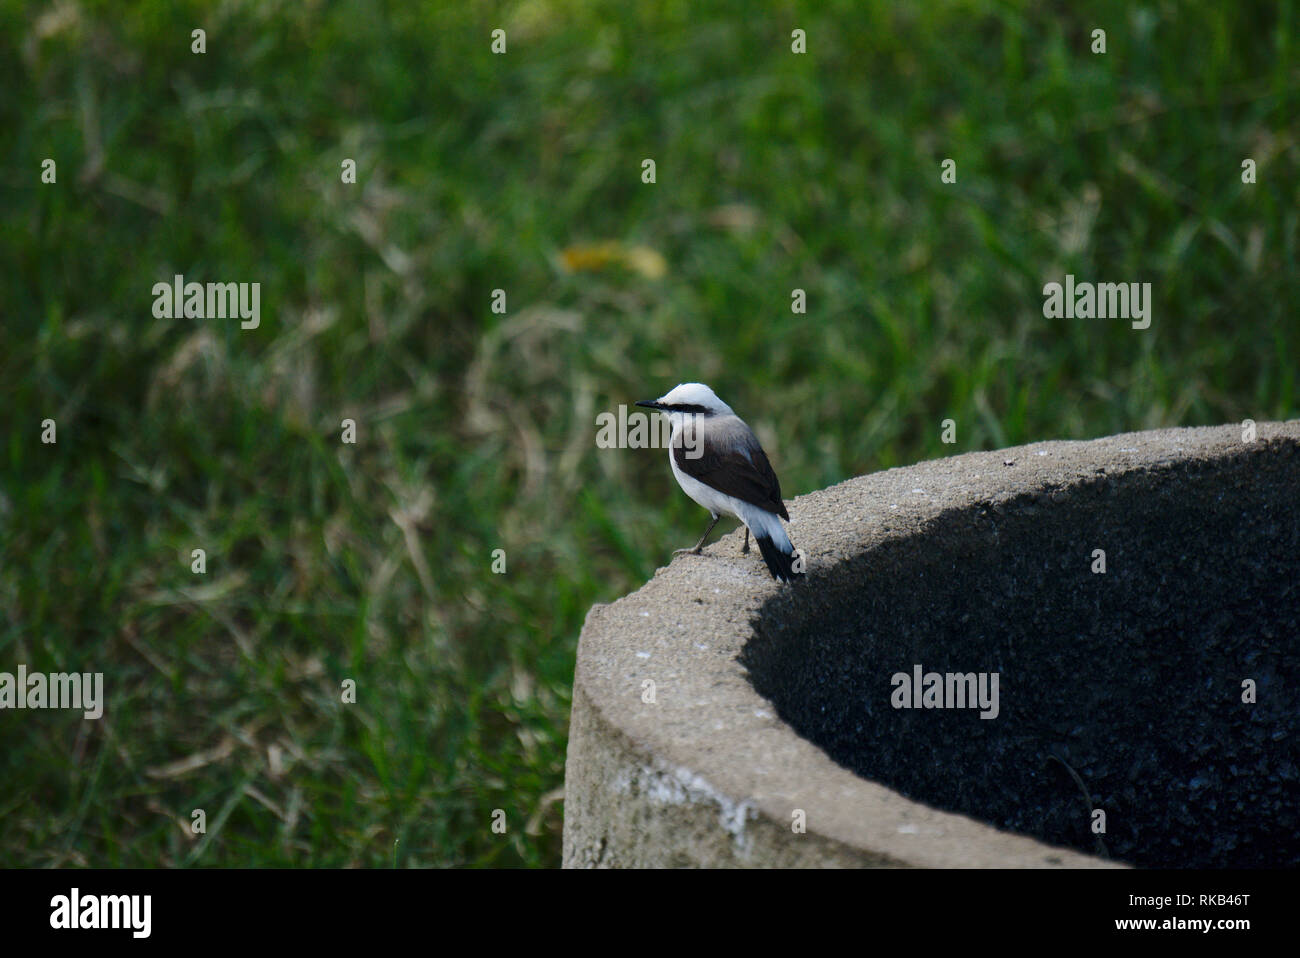 A bird waiting on the edge of a pond. Stock Photo